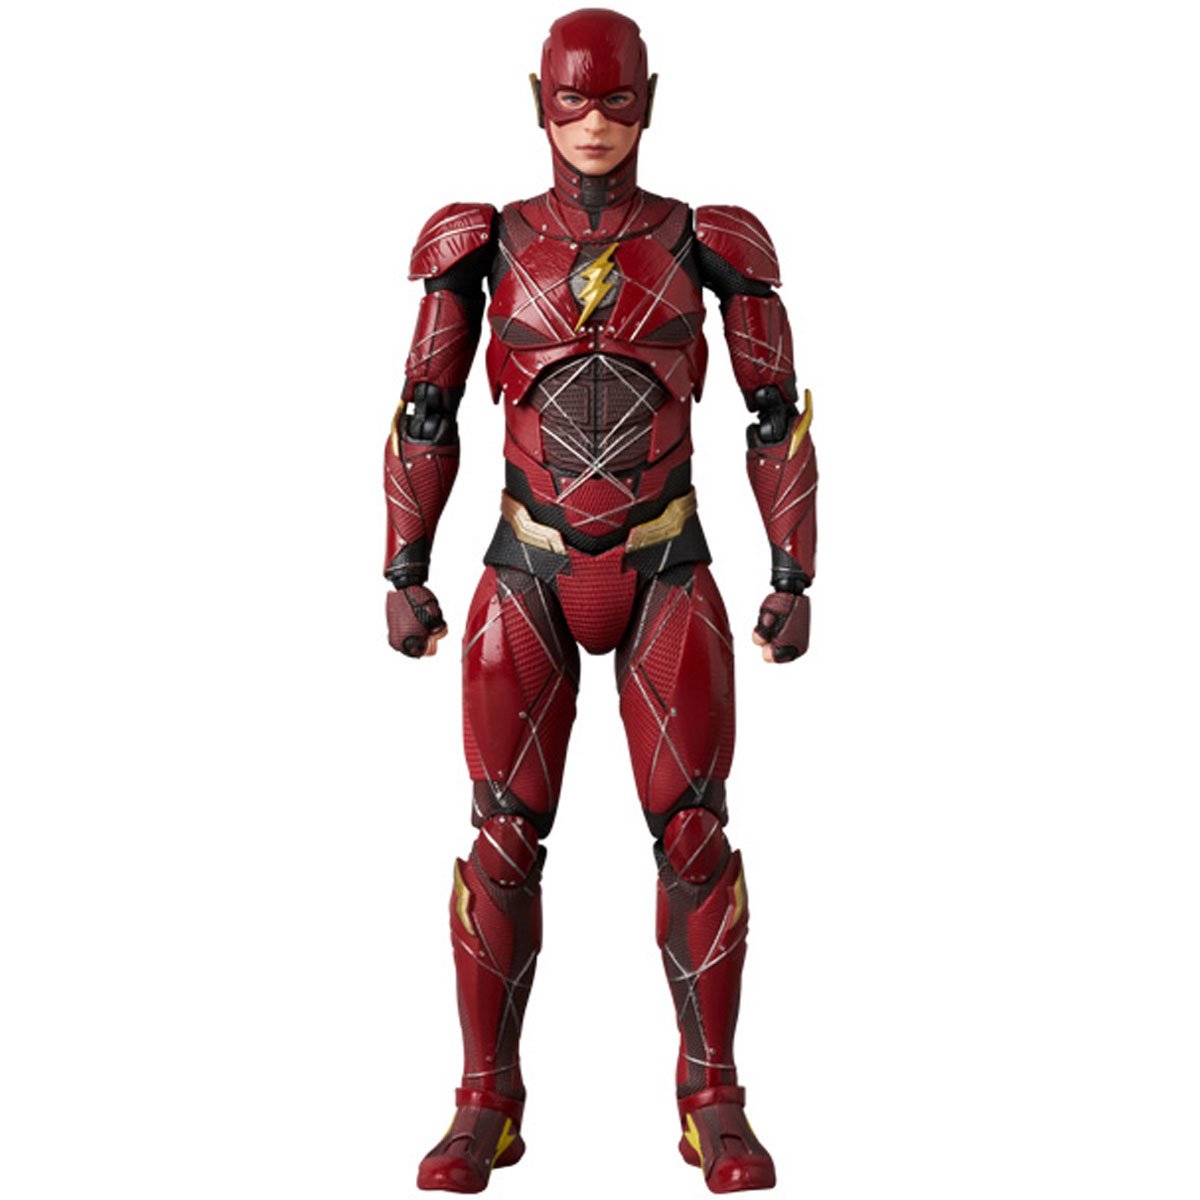 Zack Snyder's Justice League The Flash MAFEX Action Figure